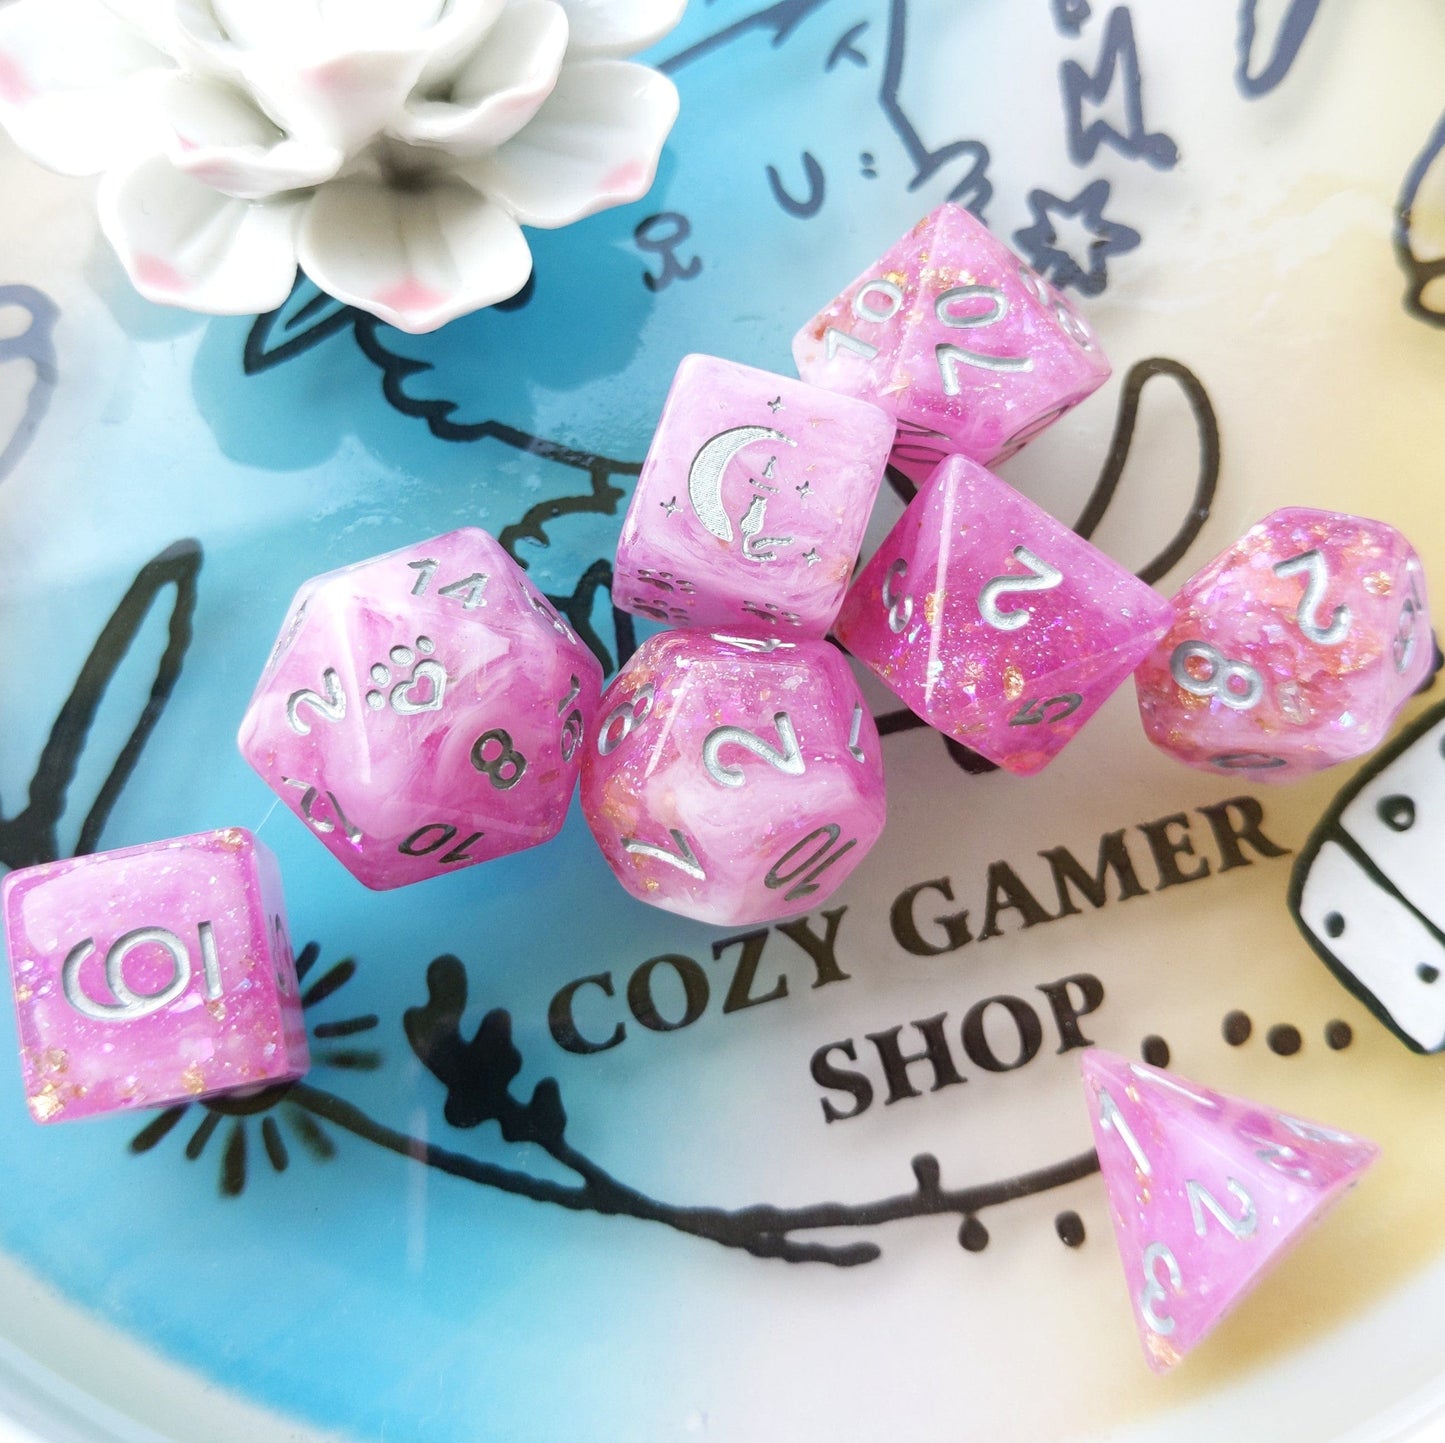 Cherry Blossom 8 Piece Dice Set. Clear Pink and White Marble, with Glitter and Foil - CozyGamer